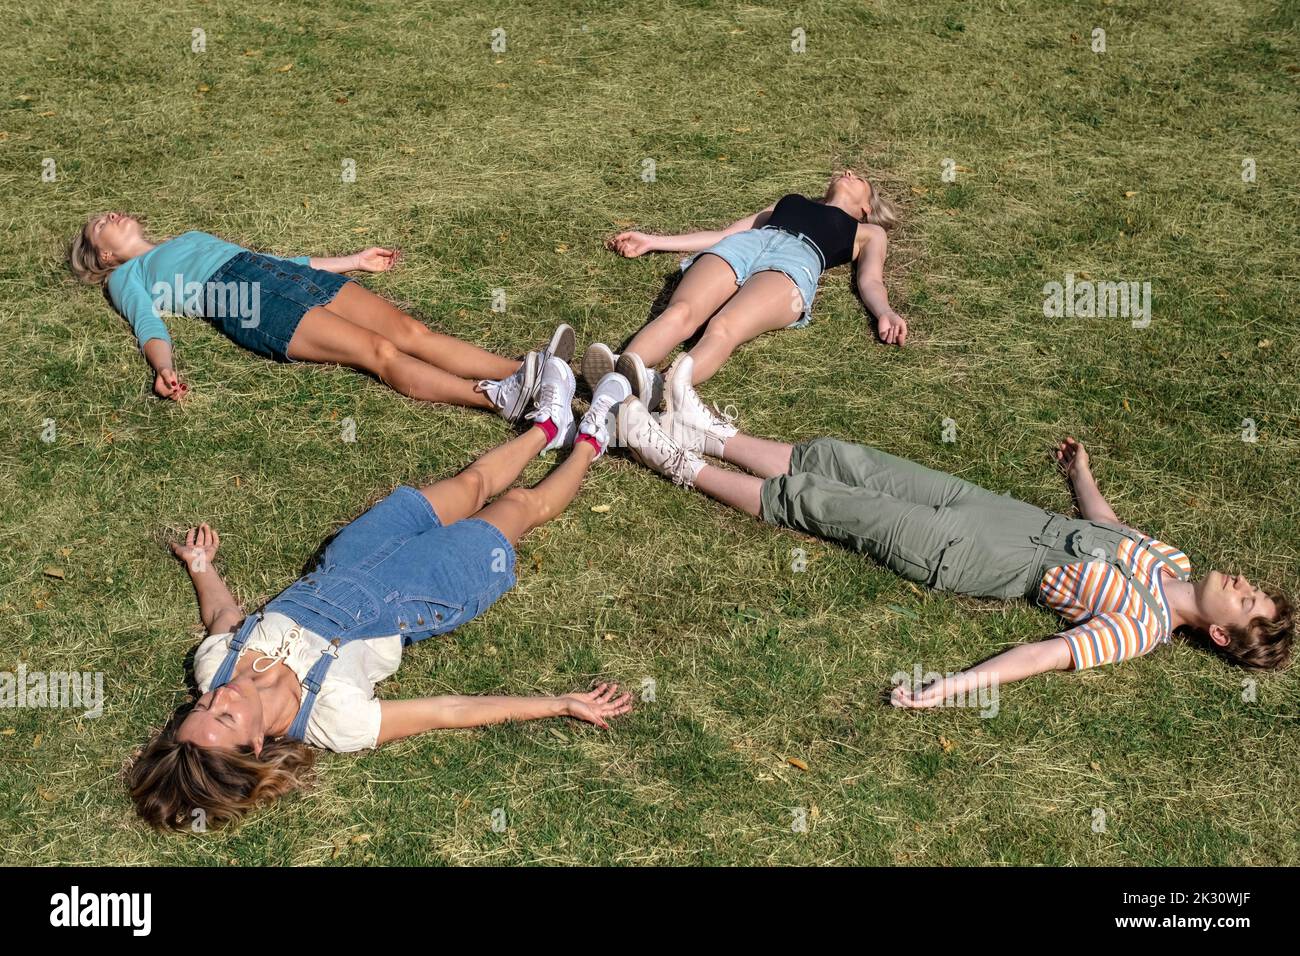 Friends lying together on grass at park Stock Photo